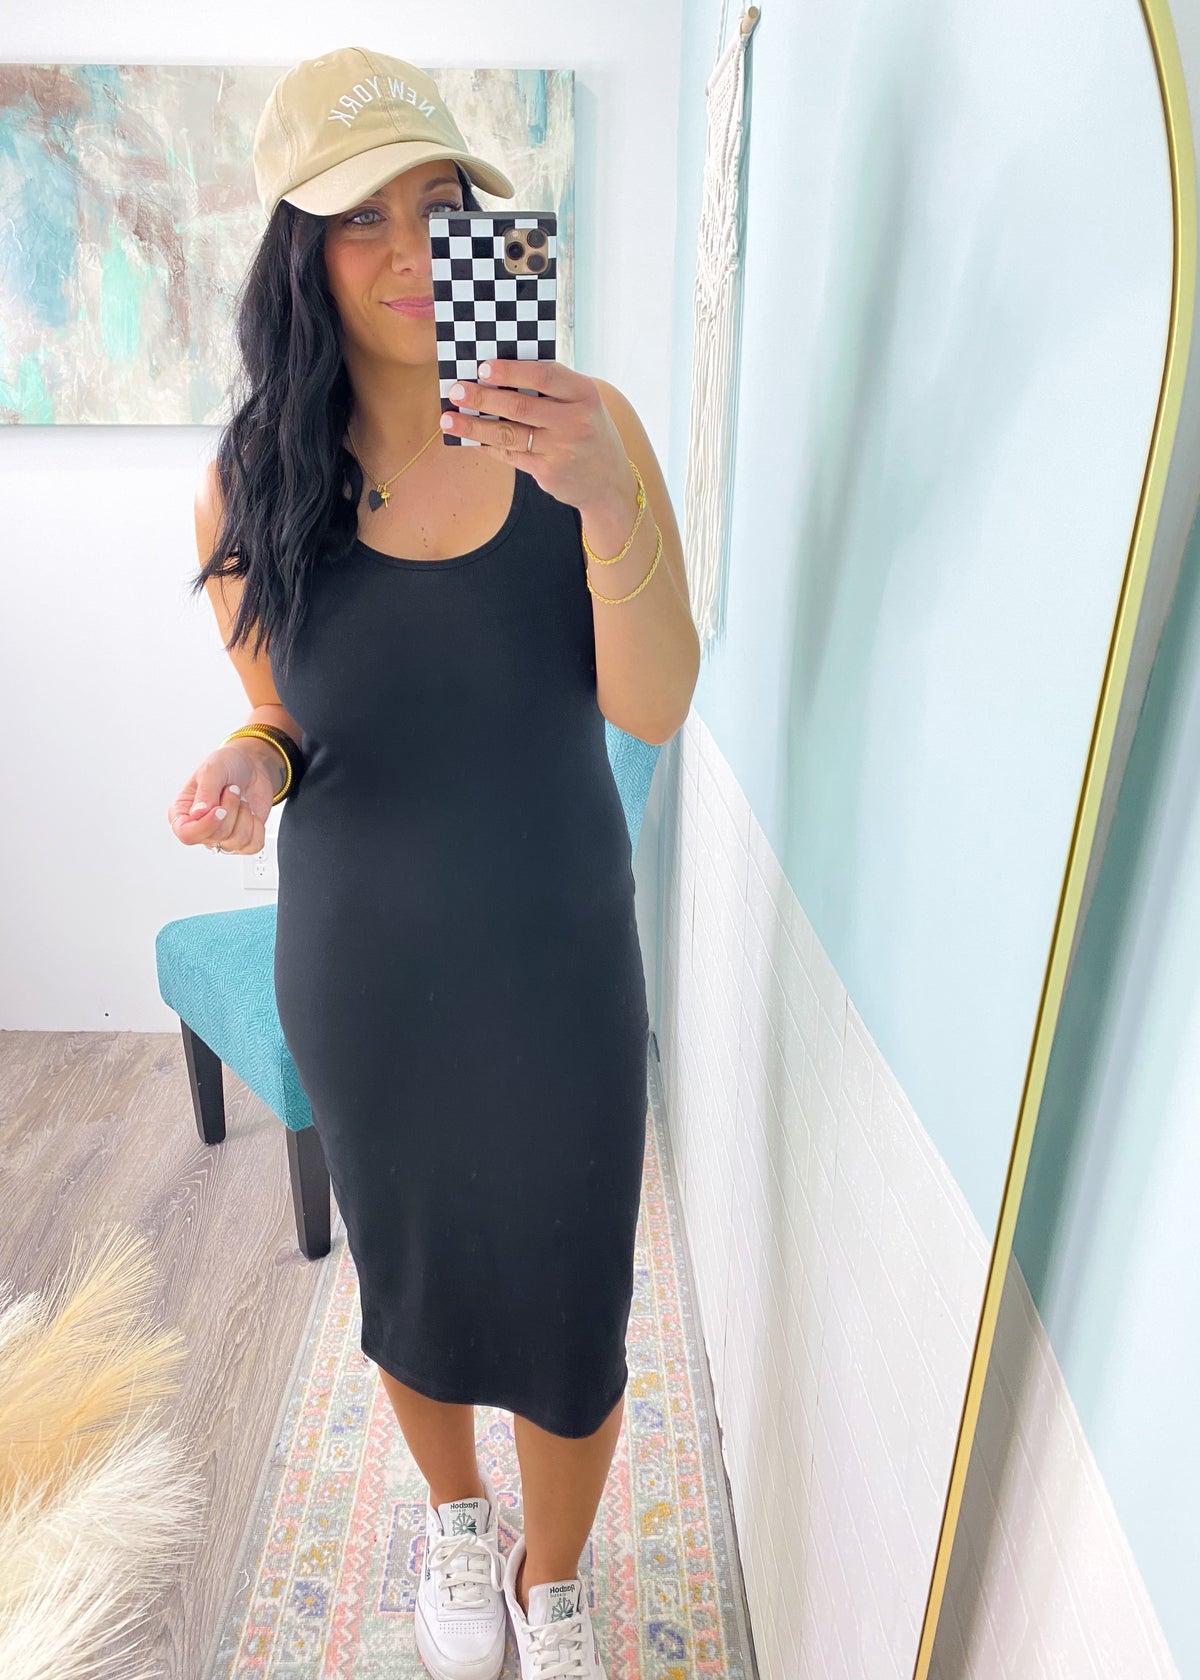 'Tell It Like It Is' Black Cotton Fitted Midi Dress-The little black casual dress! This cotton blend fitted dress is a perfect option to throw on and go with a pair of sneakers or heels depending on your day! Wear under leather/denim jackets or oversized tops for all different looks!-Cali Moon Boutique, Plainville Connecticut